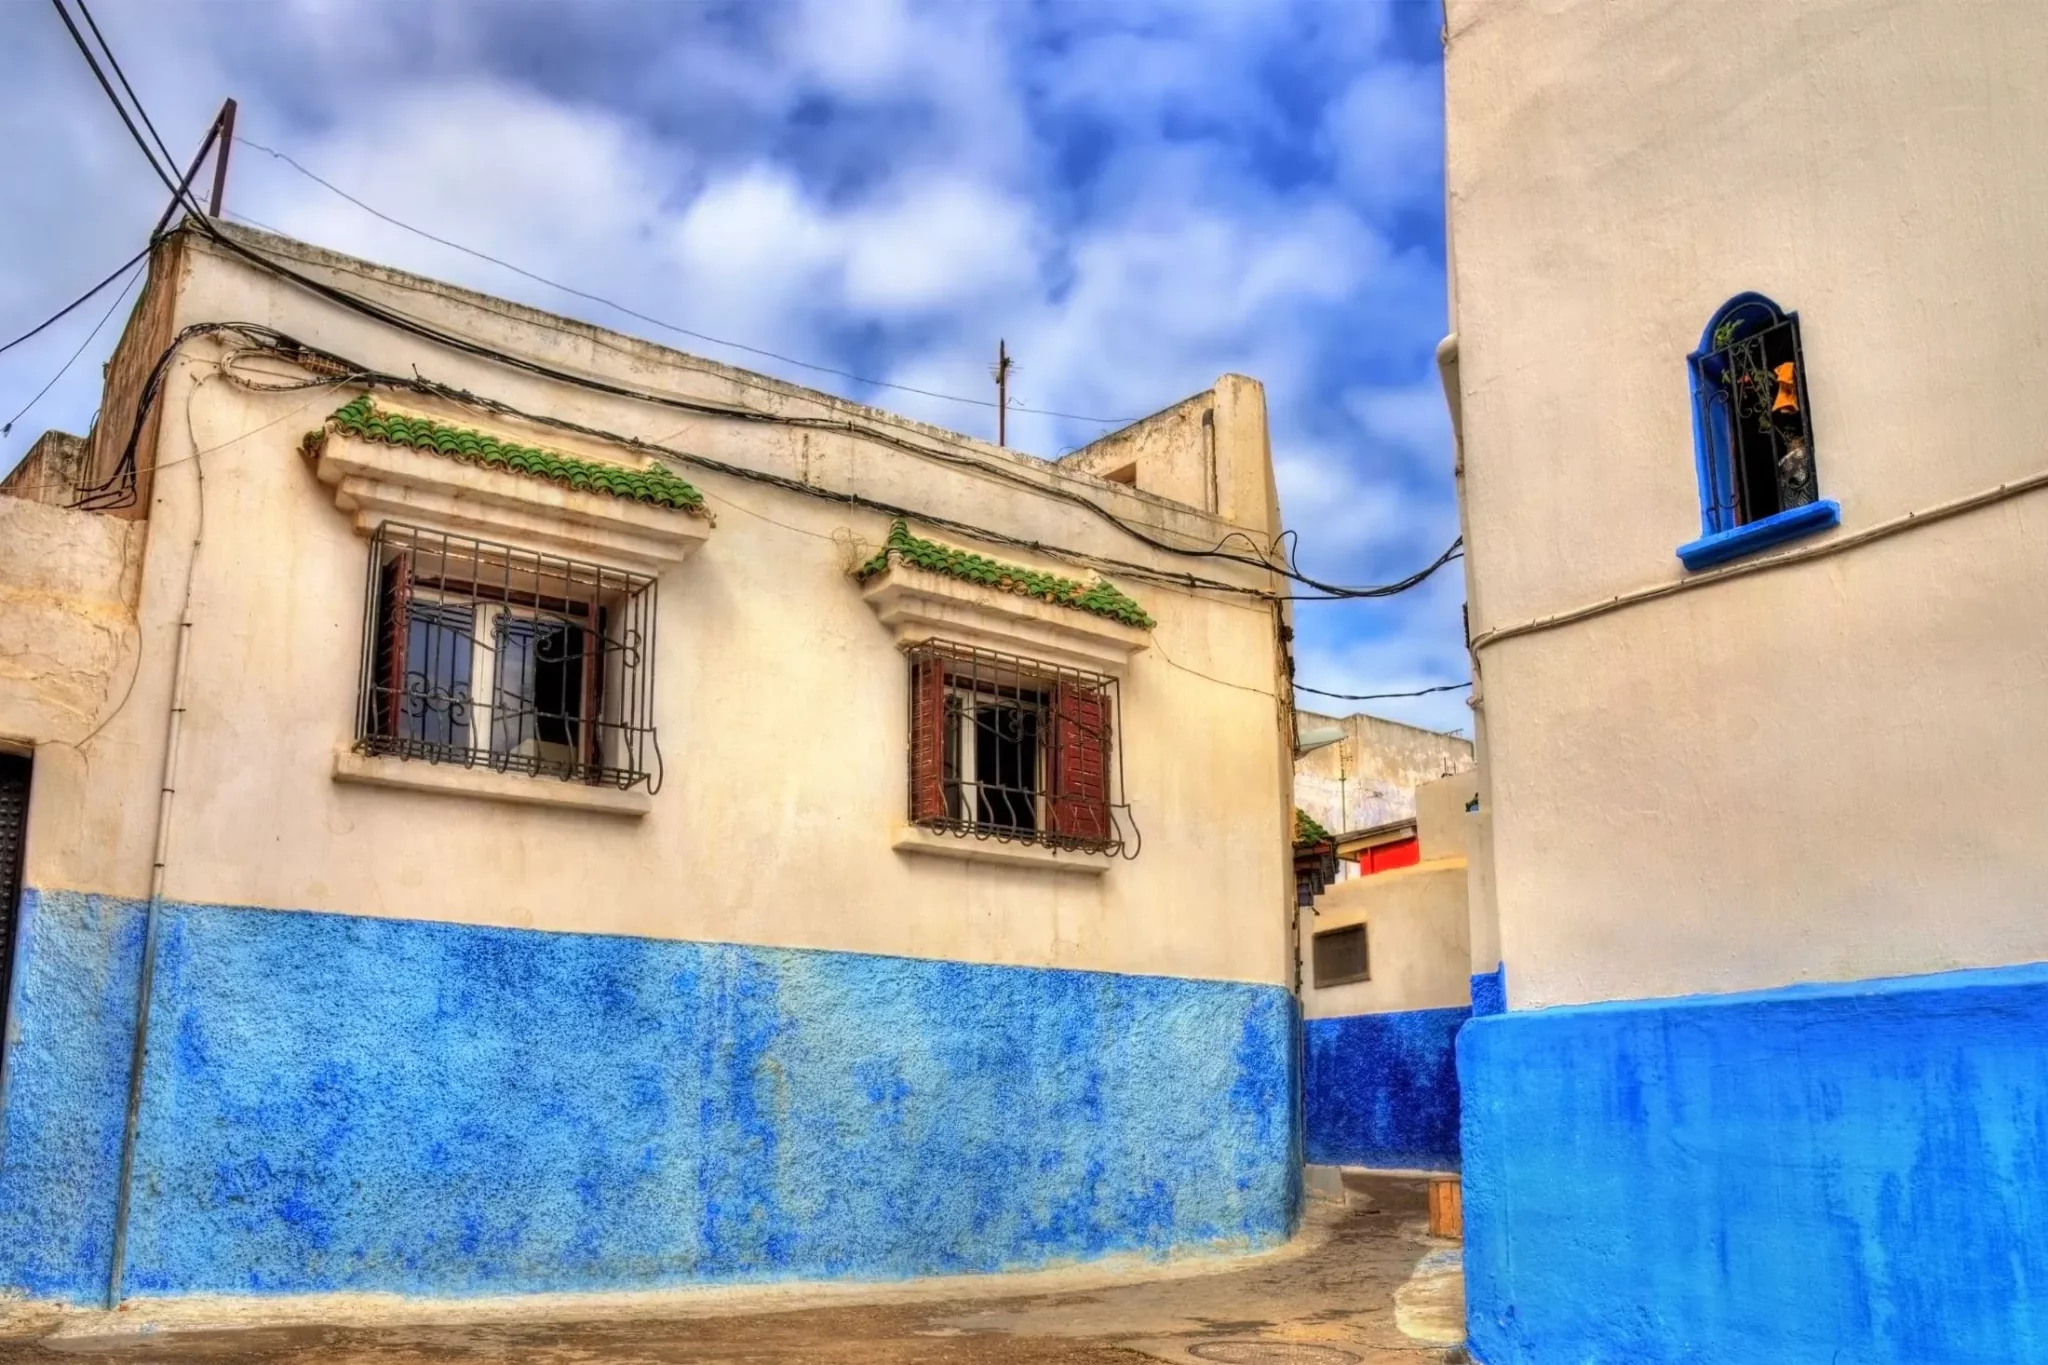 Signature blue and white houses in Kasbah of the Udayas